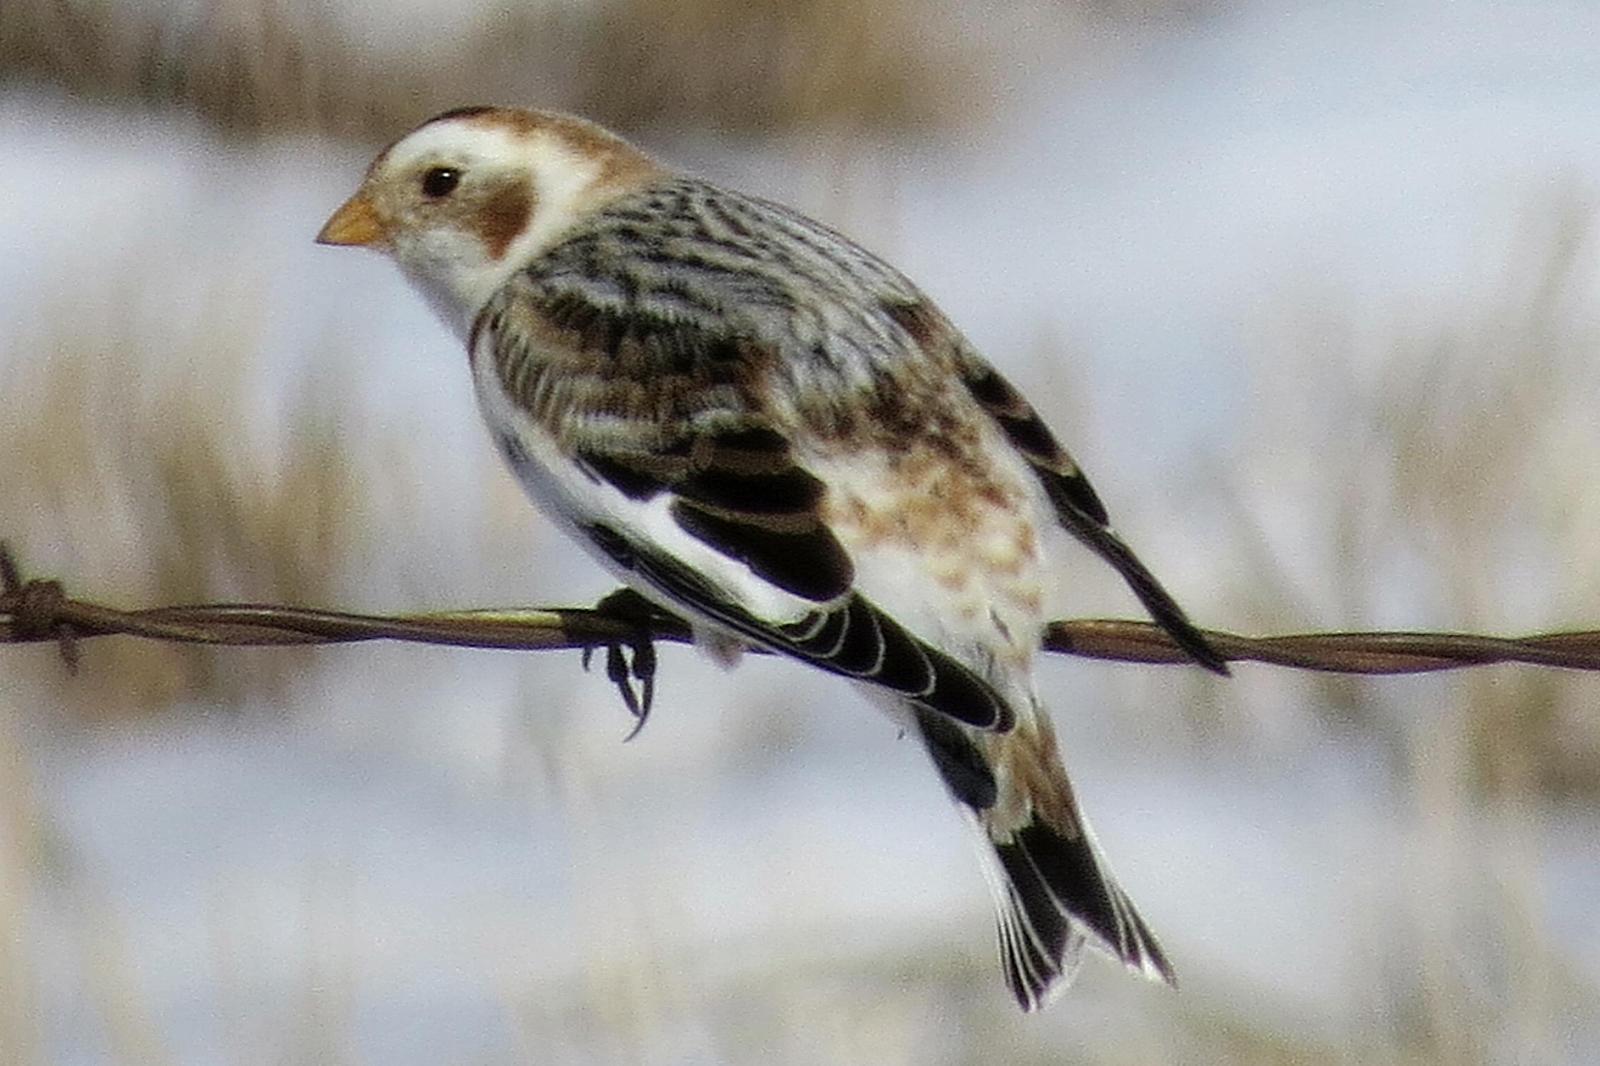 Snow Bunting Photo by Enid Bachman